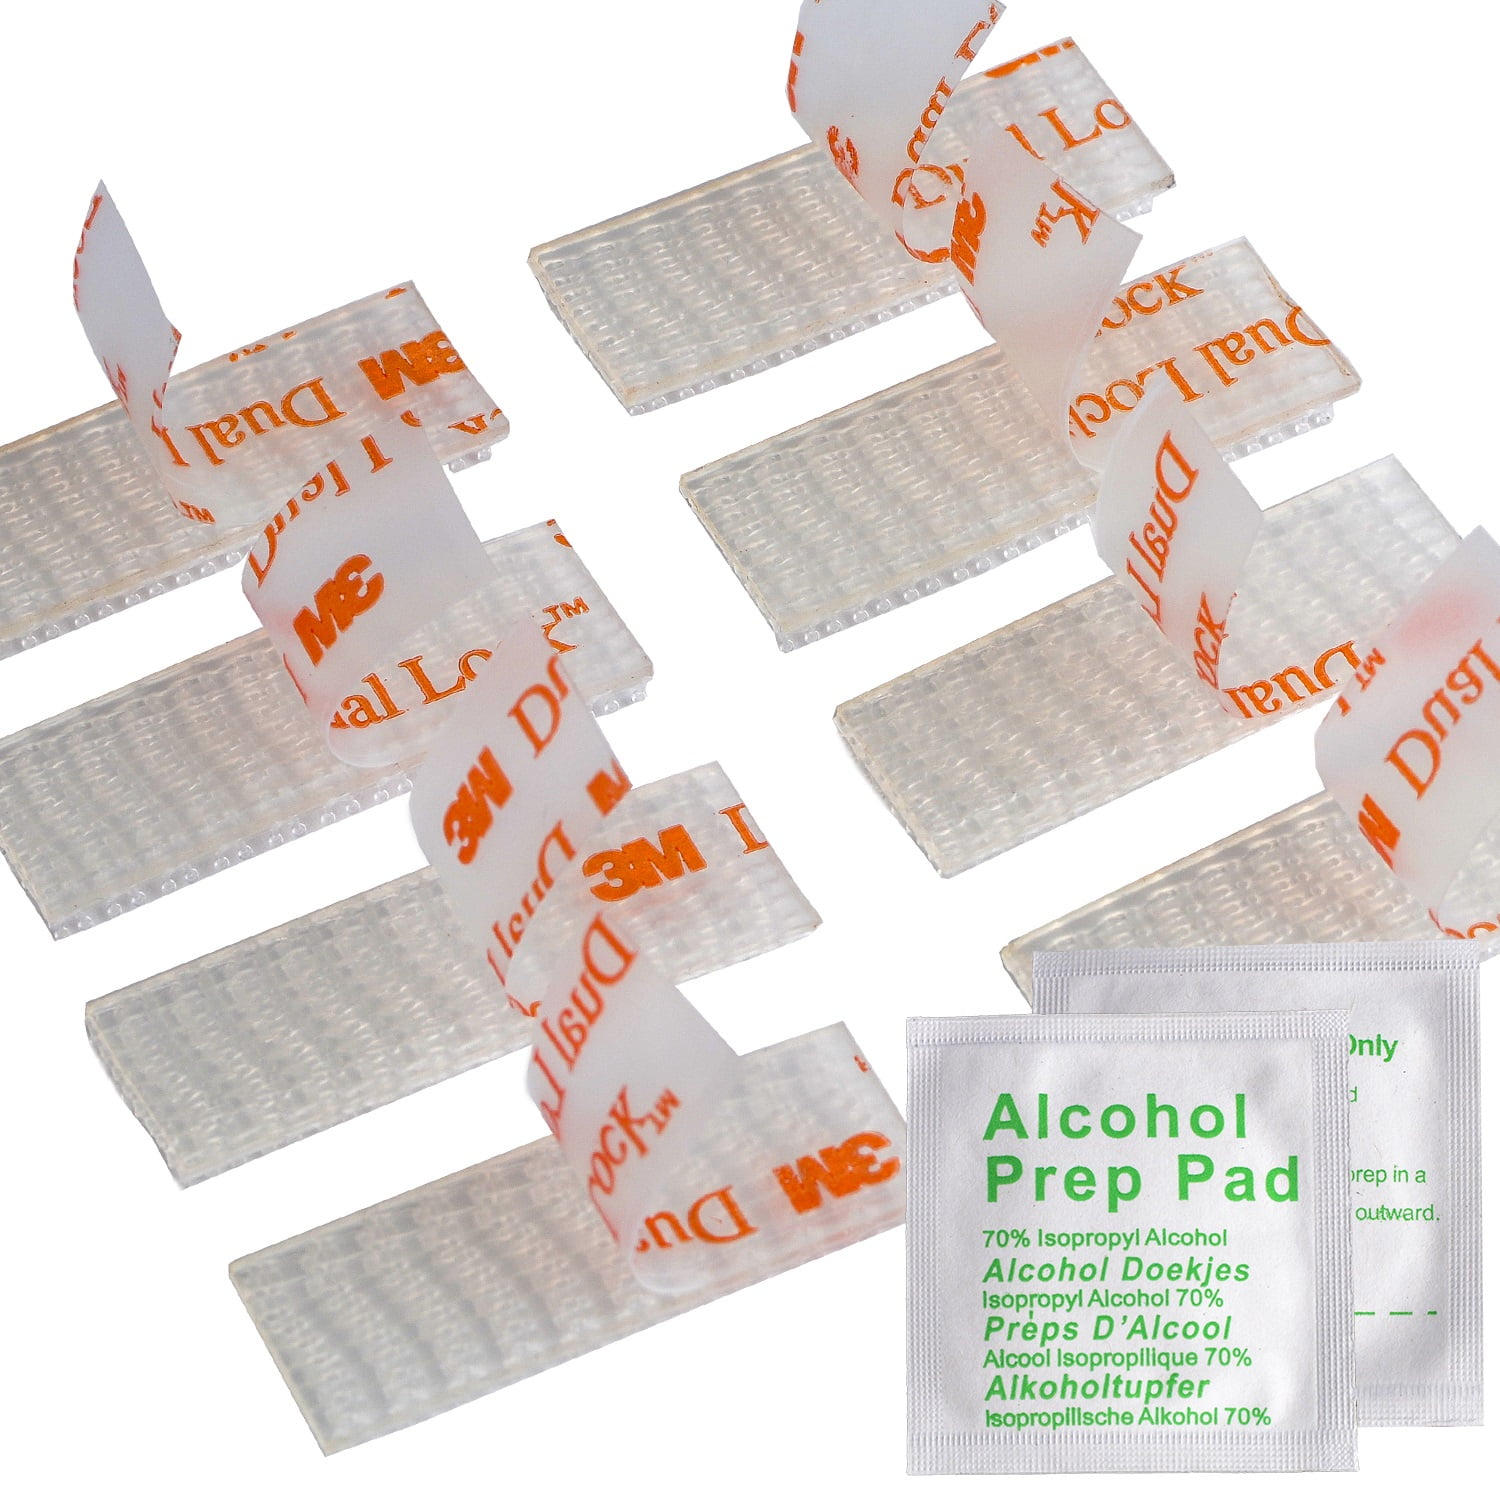 EZ Pass/I-Pass/Toll Tag Tape Mounting Kit - Peel and Stick Adhesive Strips  Dual Lock Tape - 4 Strips (2 Sets) with Alcohol Prep Pad, Packaging may